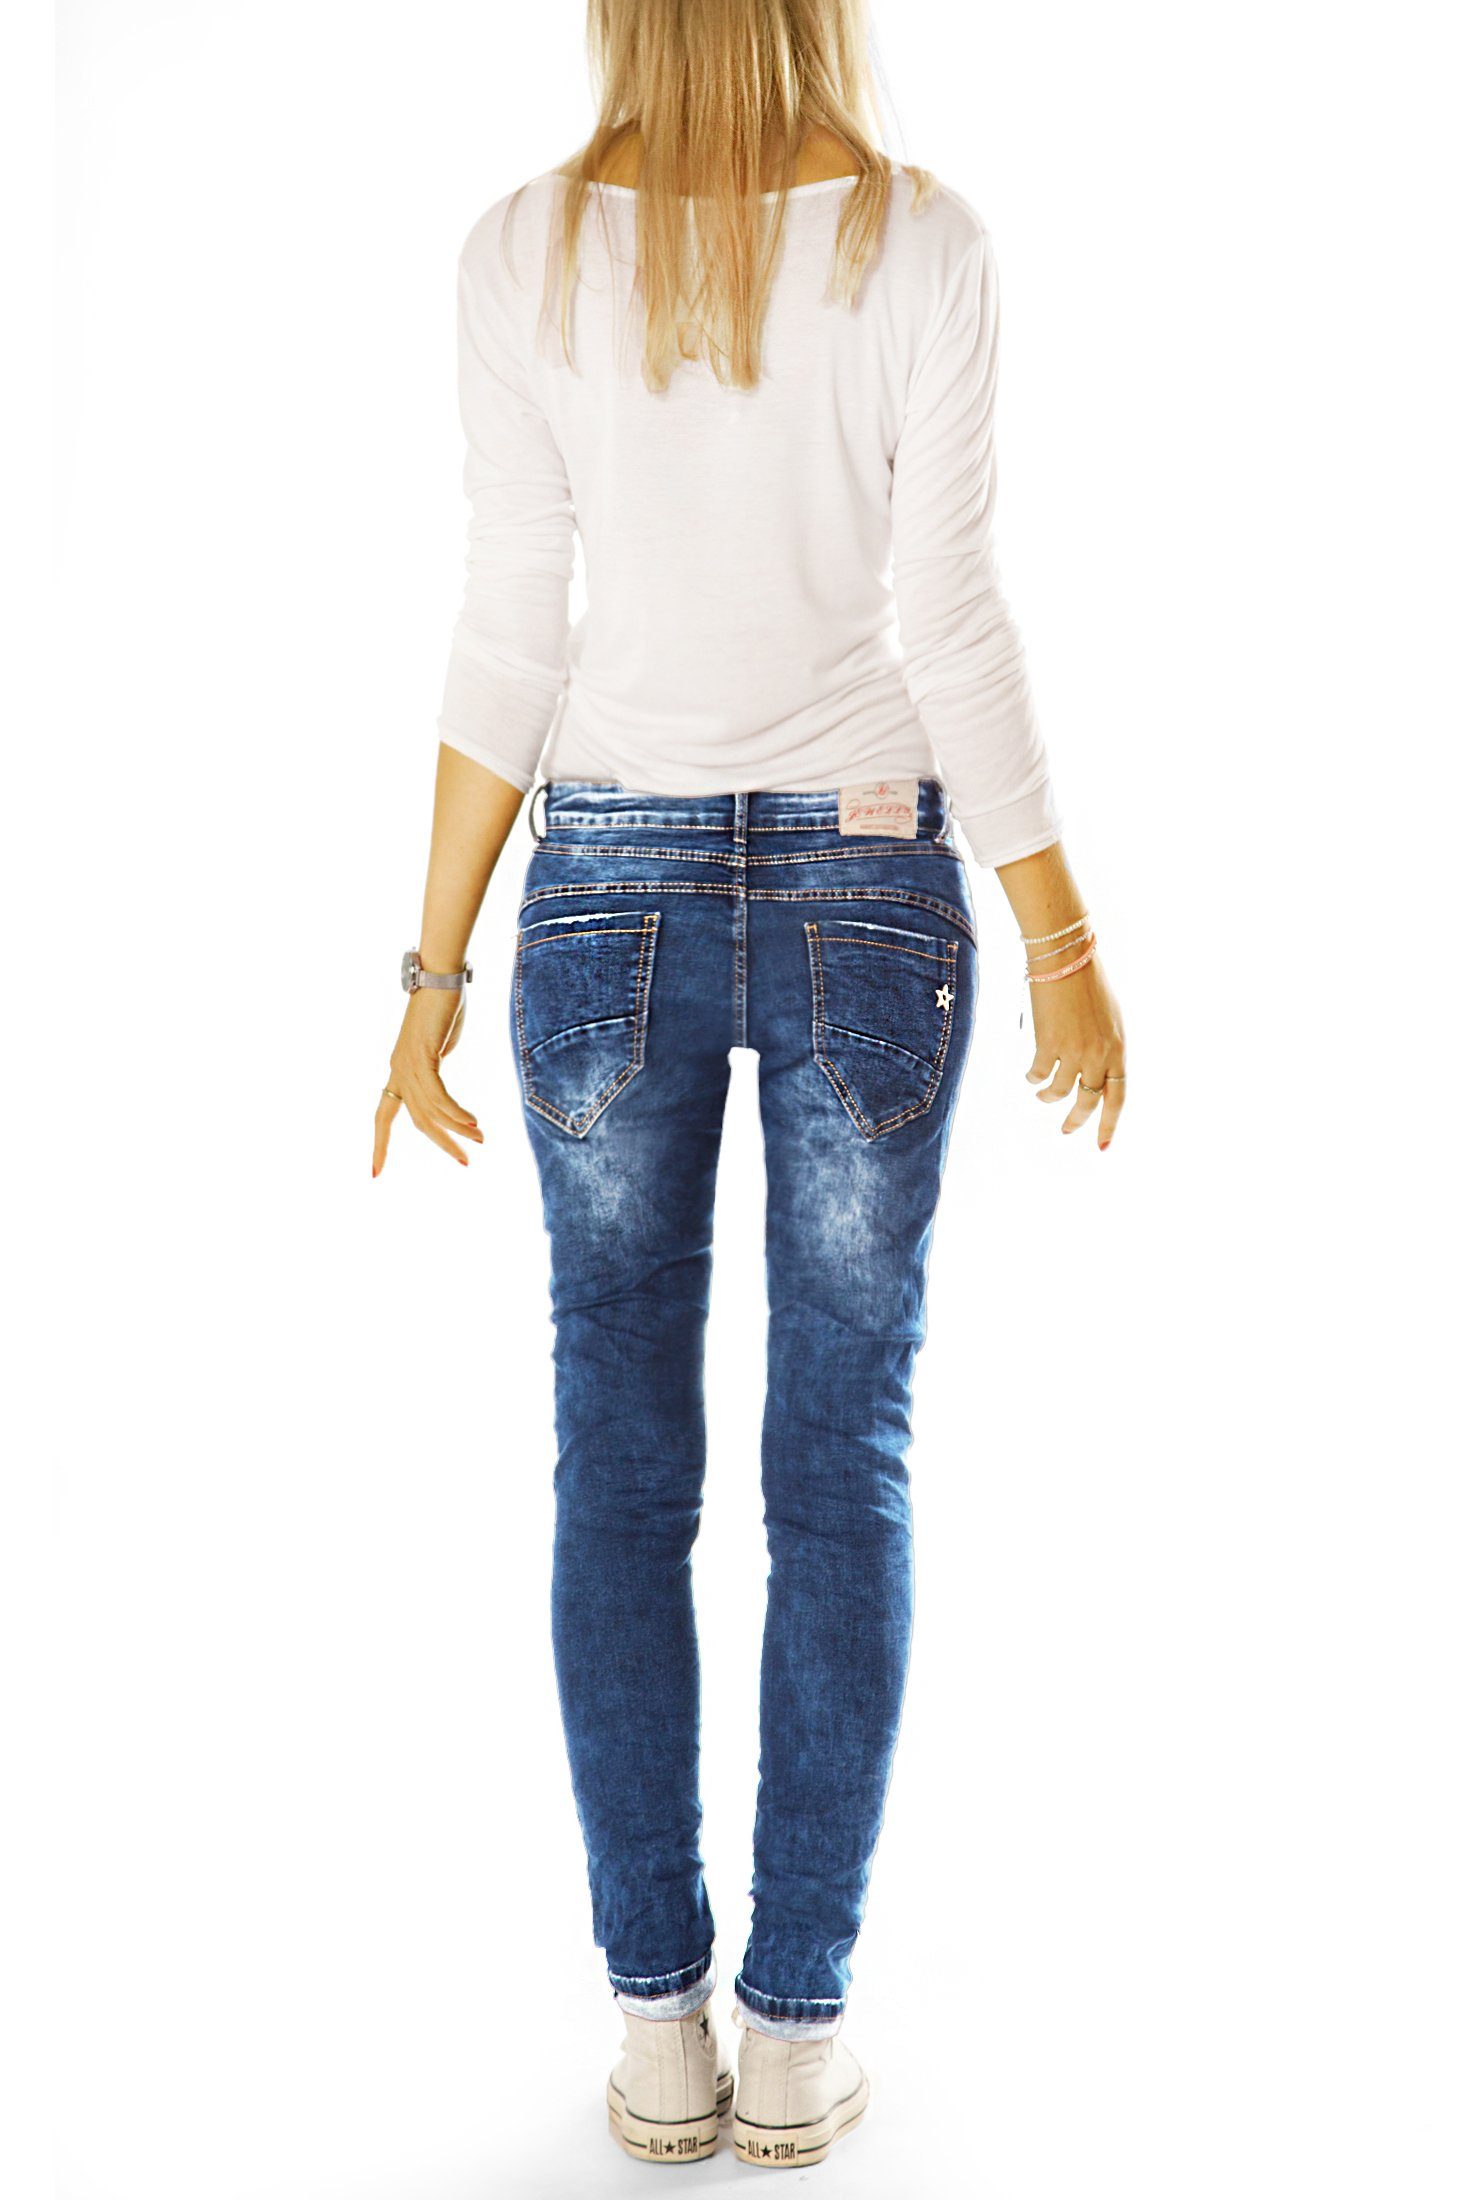 be styled Slim-fit-Jeans - Stretch-Anteil, Hose Damen Fit Relaxed 5-Pocket-Style im Fit mit Look - Slim j4g-1 Hüftjeans